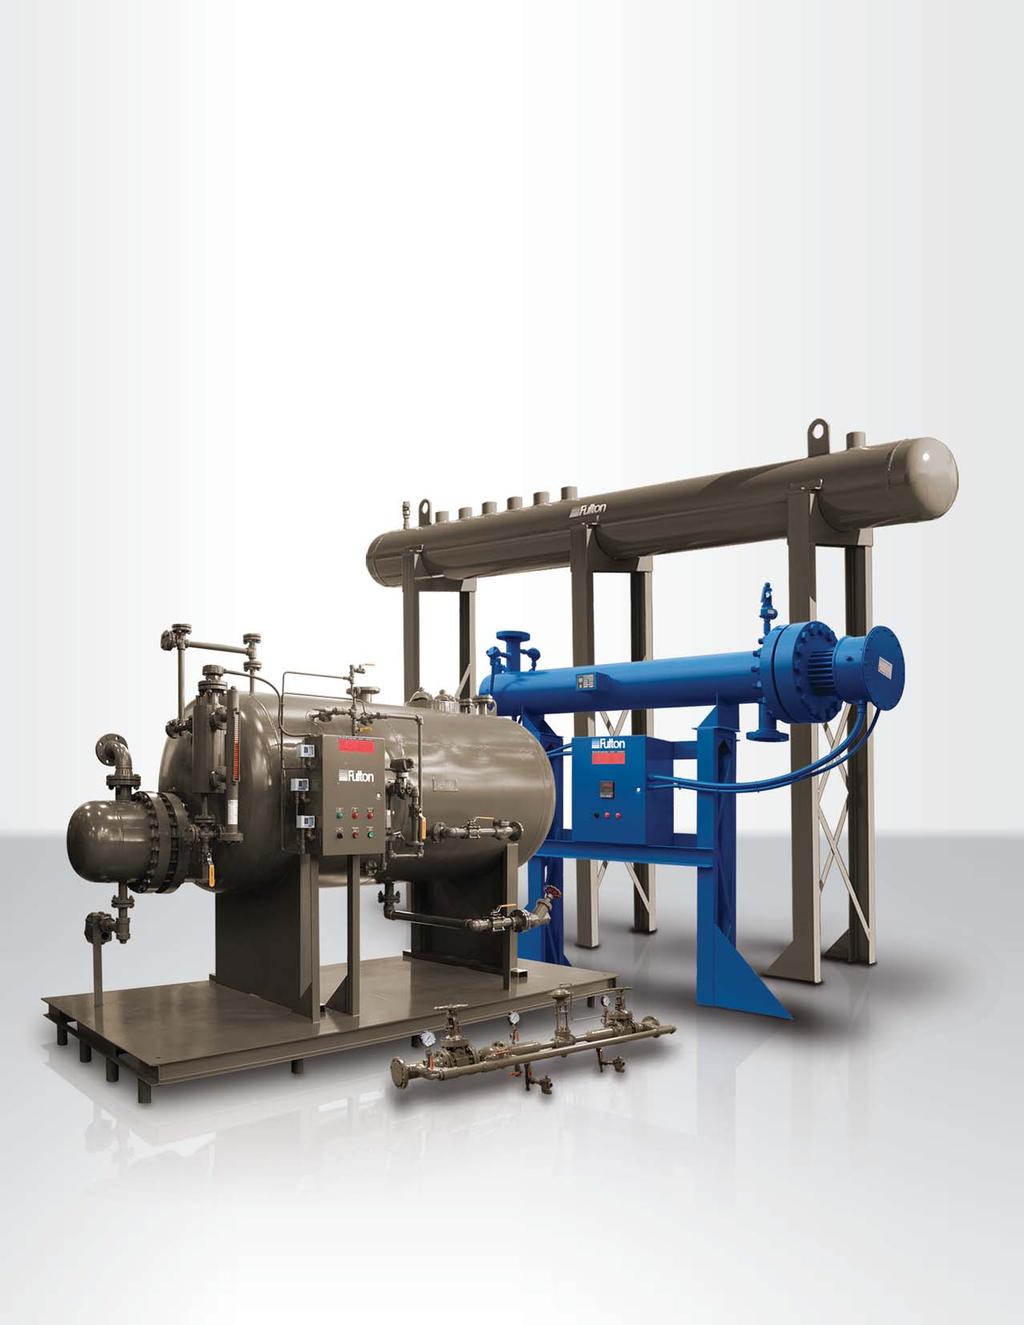 EQUIPMENT Unfired Steam Generators Accumulators Superheaters Steam Separators / Filters PRV Stations THE PURPOSE Our auxiliary equipment is used to control the quality, pressure, storage capacity and